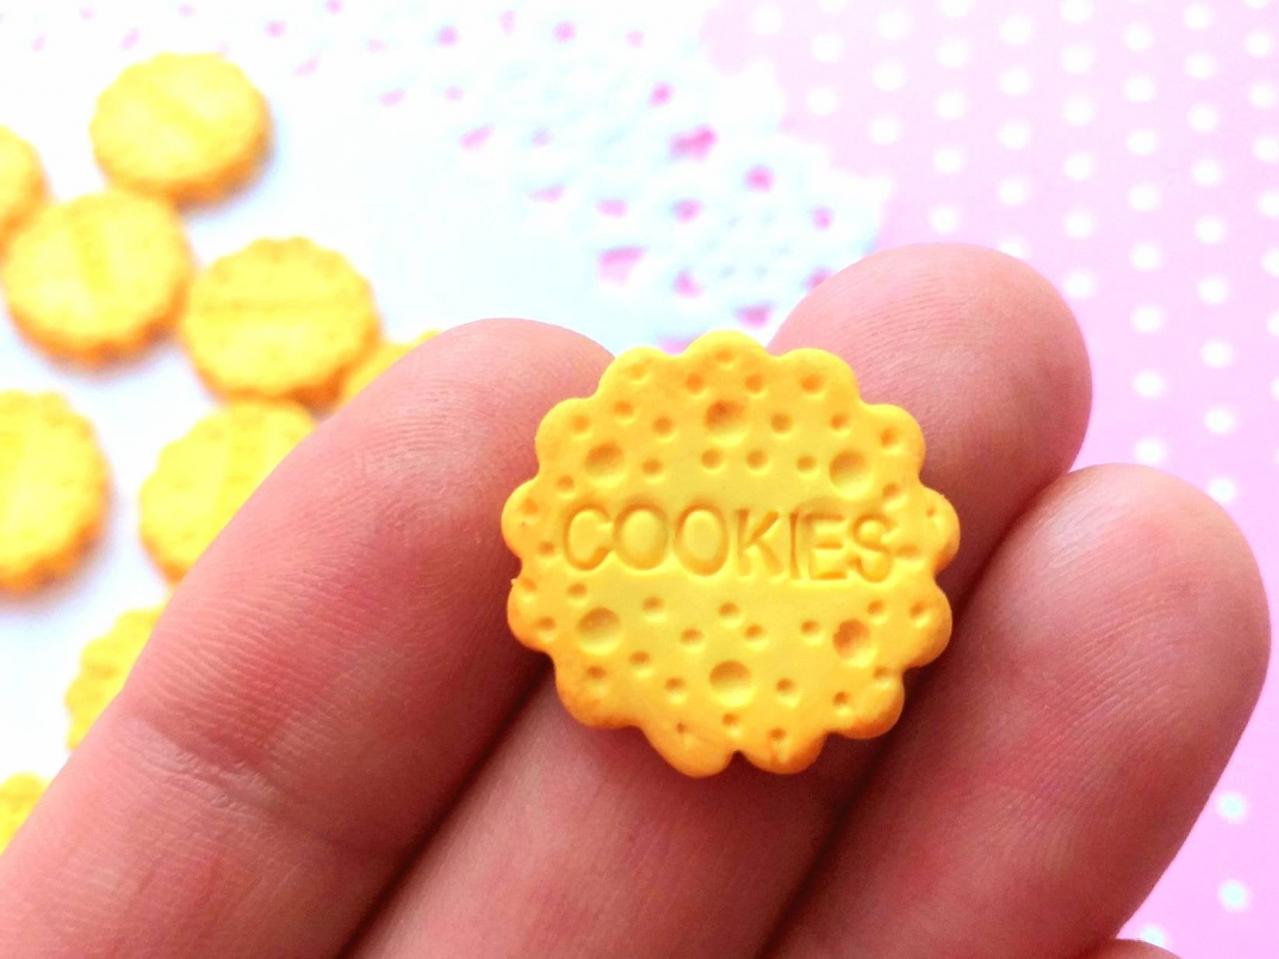 4 Cookies Cabochons, Decoden, Diy, Fake Food Cabochons , Slime, Polymer Clay, Phone Case, Dollhouse, Craft Supplies